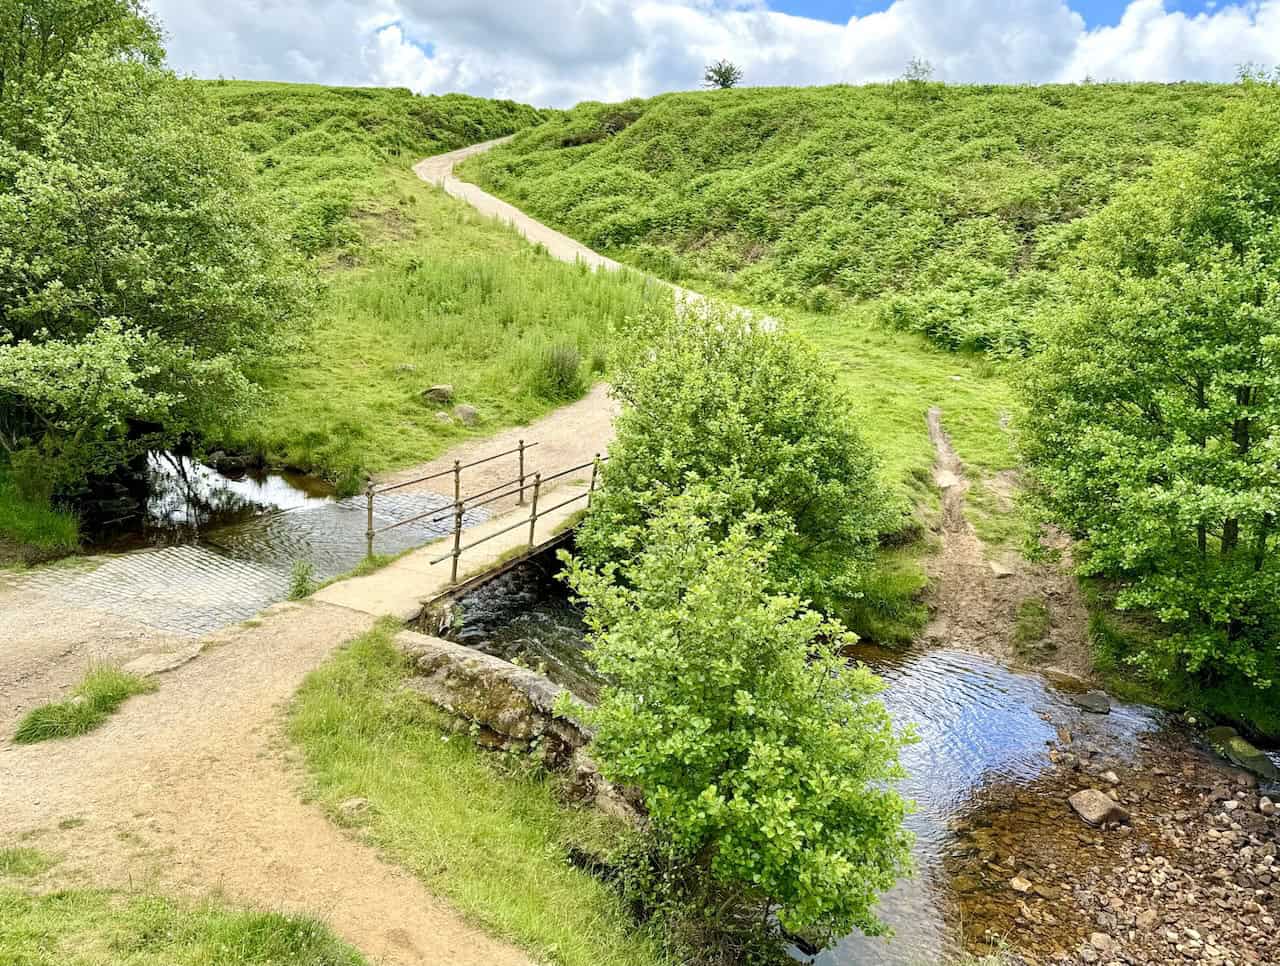 This is the footbridge and ford known as the Sheepwash near the northern end of Cod Beck Reservoir. The name possibly derives from shepherds bringing their sheep down from the surrounding moorland and washing them in the beck at the ford. The ford across Cod Beck was on an old drovers' road between Scotland and the south of England, known as the Hambleton Drove Road. For this Osmotherley walk, I cross the bridge and continue up the track in the photo.